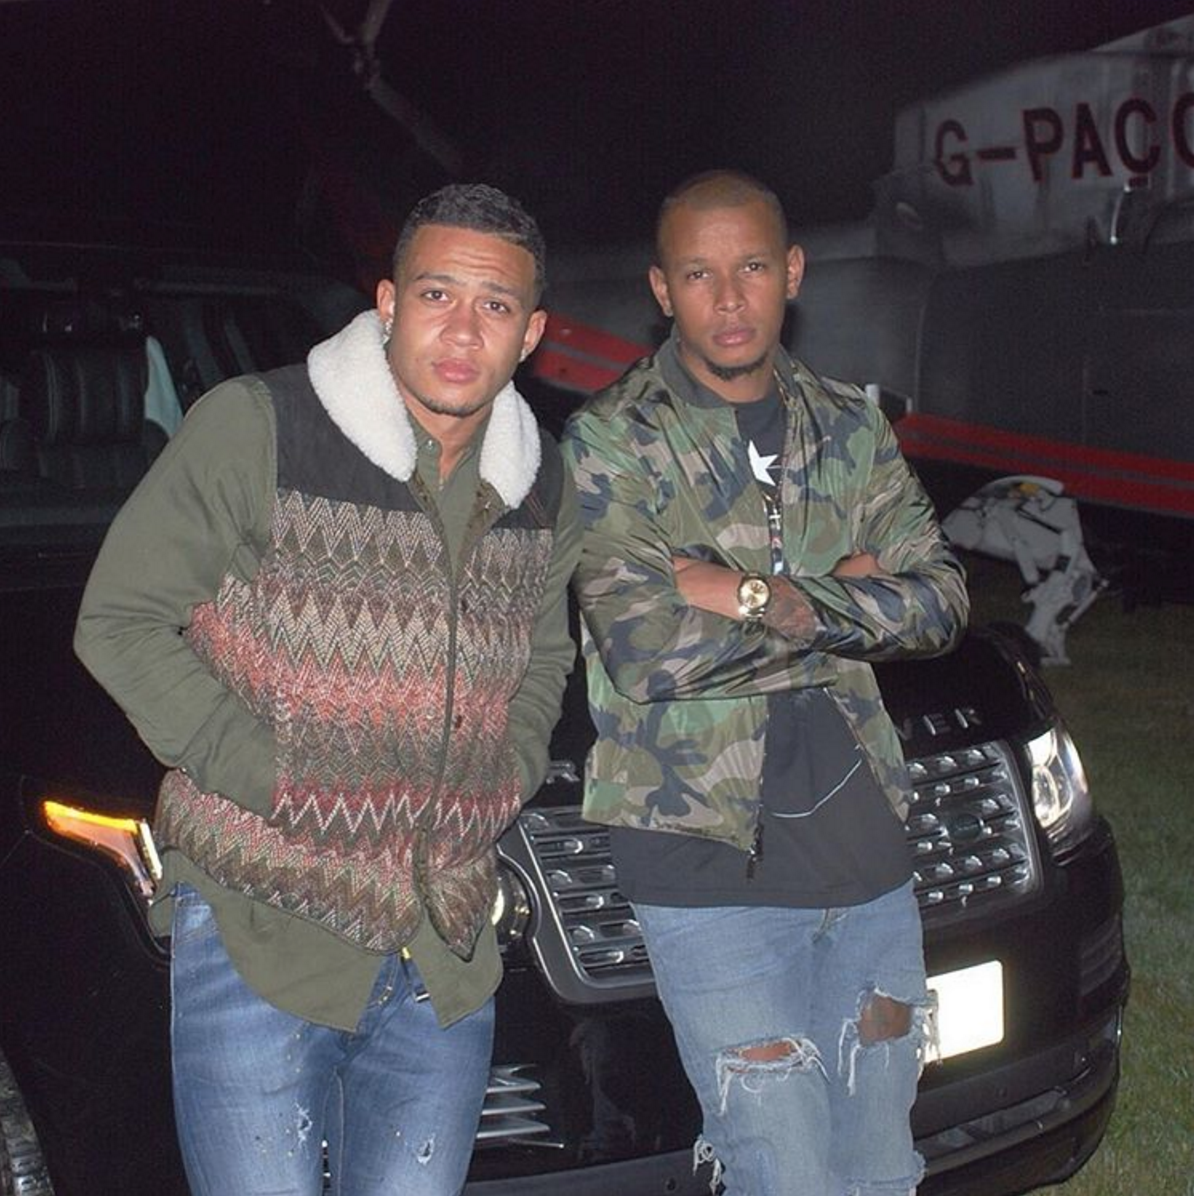 The jacket gloss worn by Memphis Depay on his account Instagram @ memphisdepay